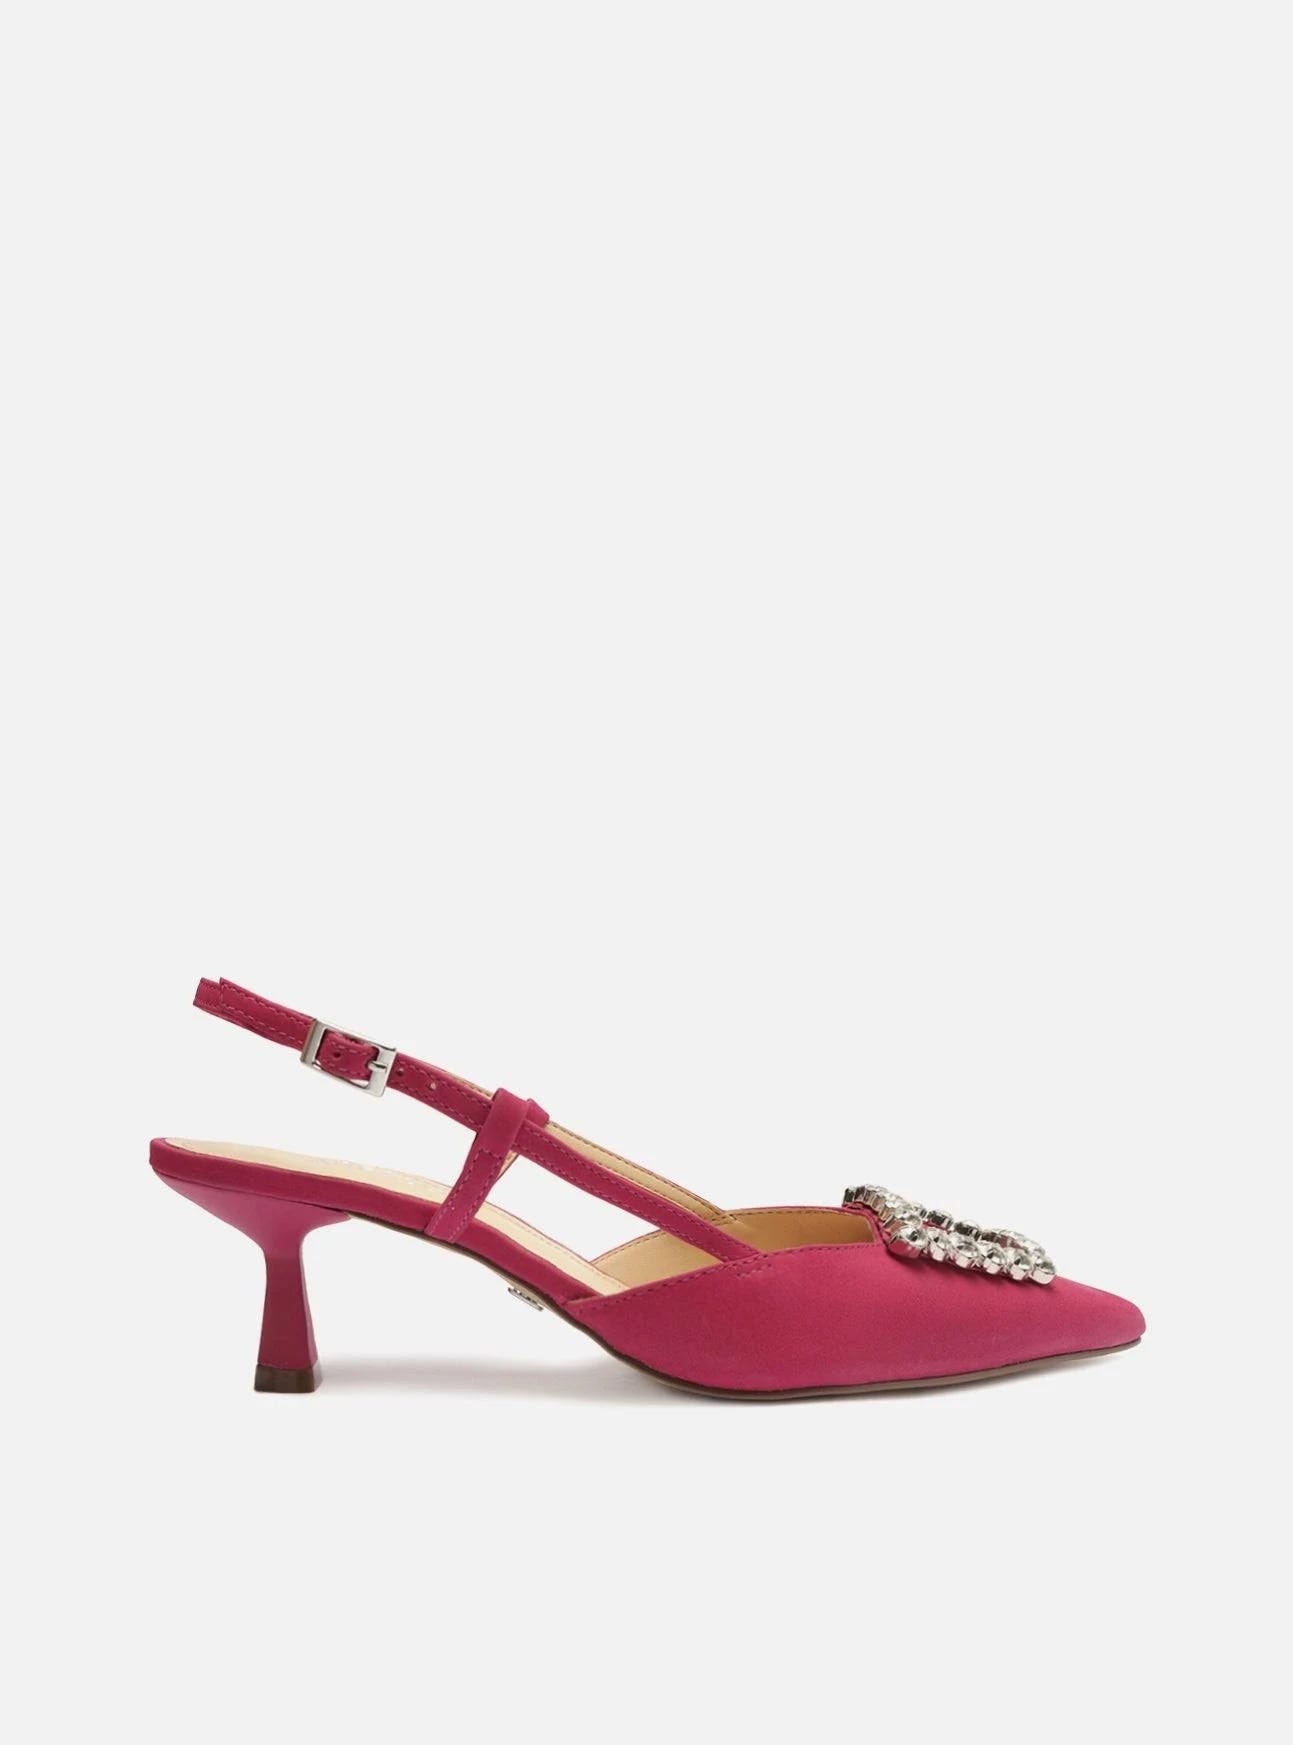 Pink Nubuck Pointed Toe Pumps with Rhinestone Buckle | Image